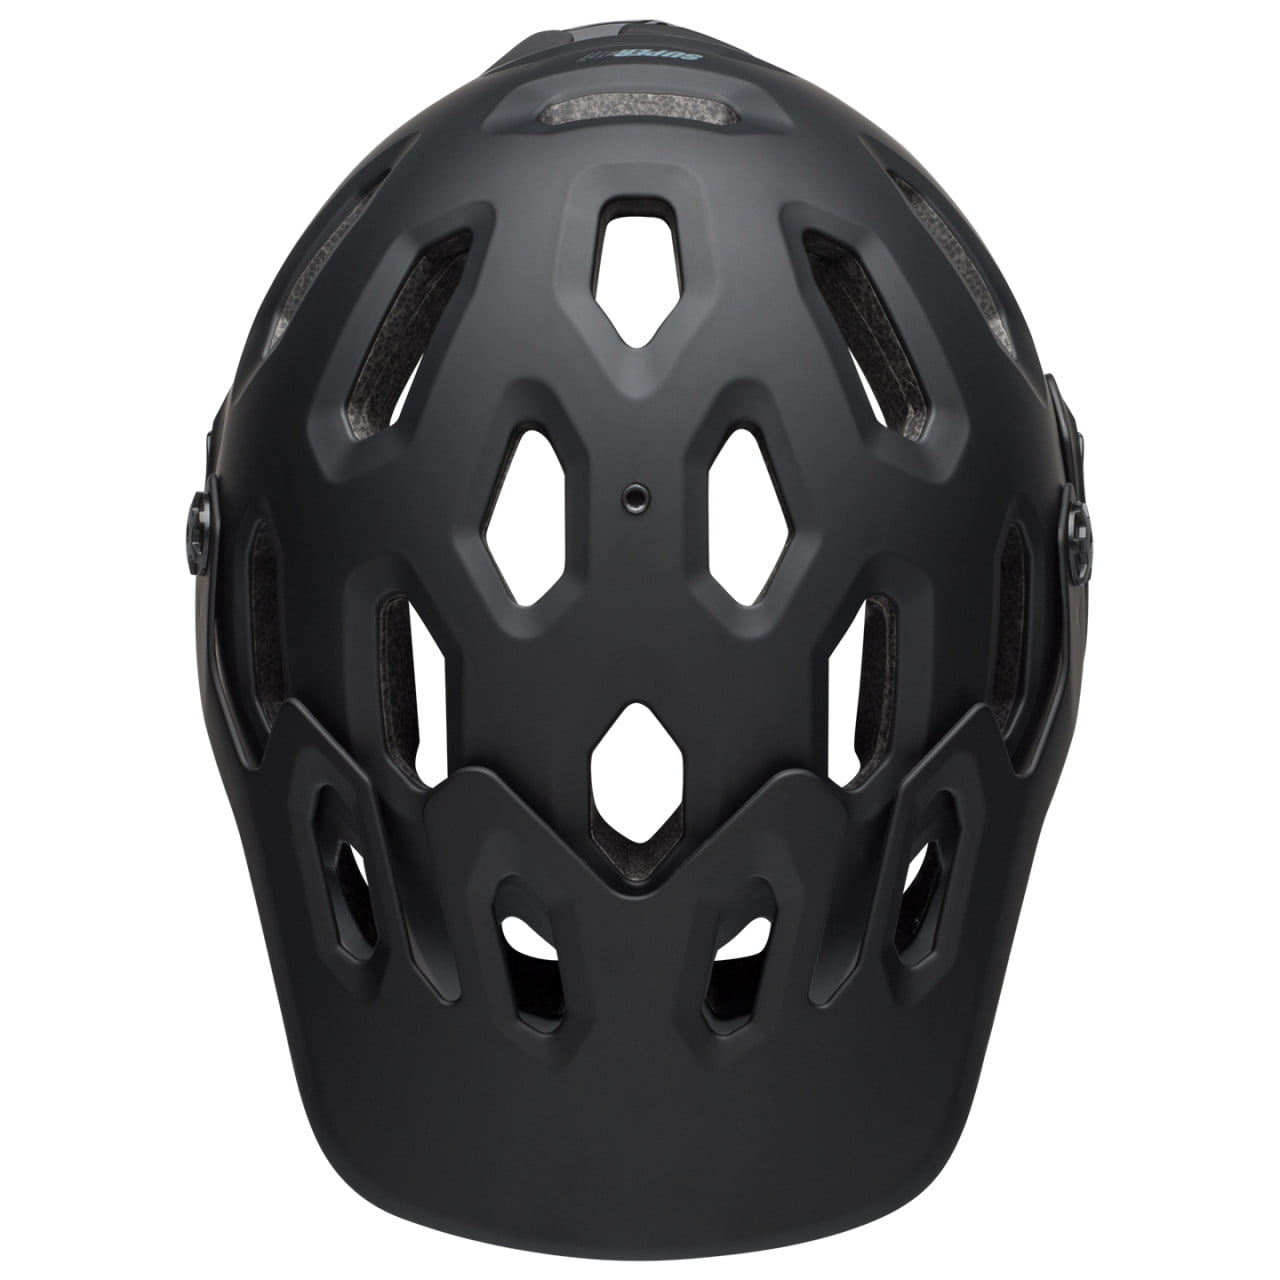 Kask rowerowy Full Face Super 3R Mips